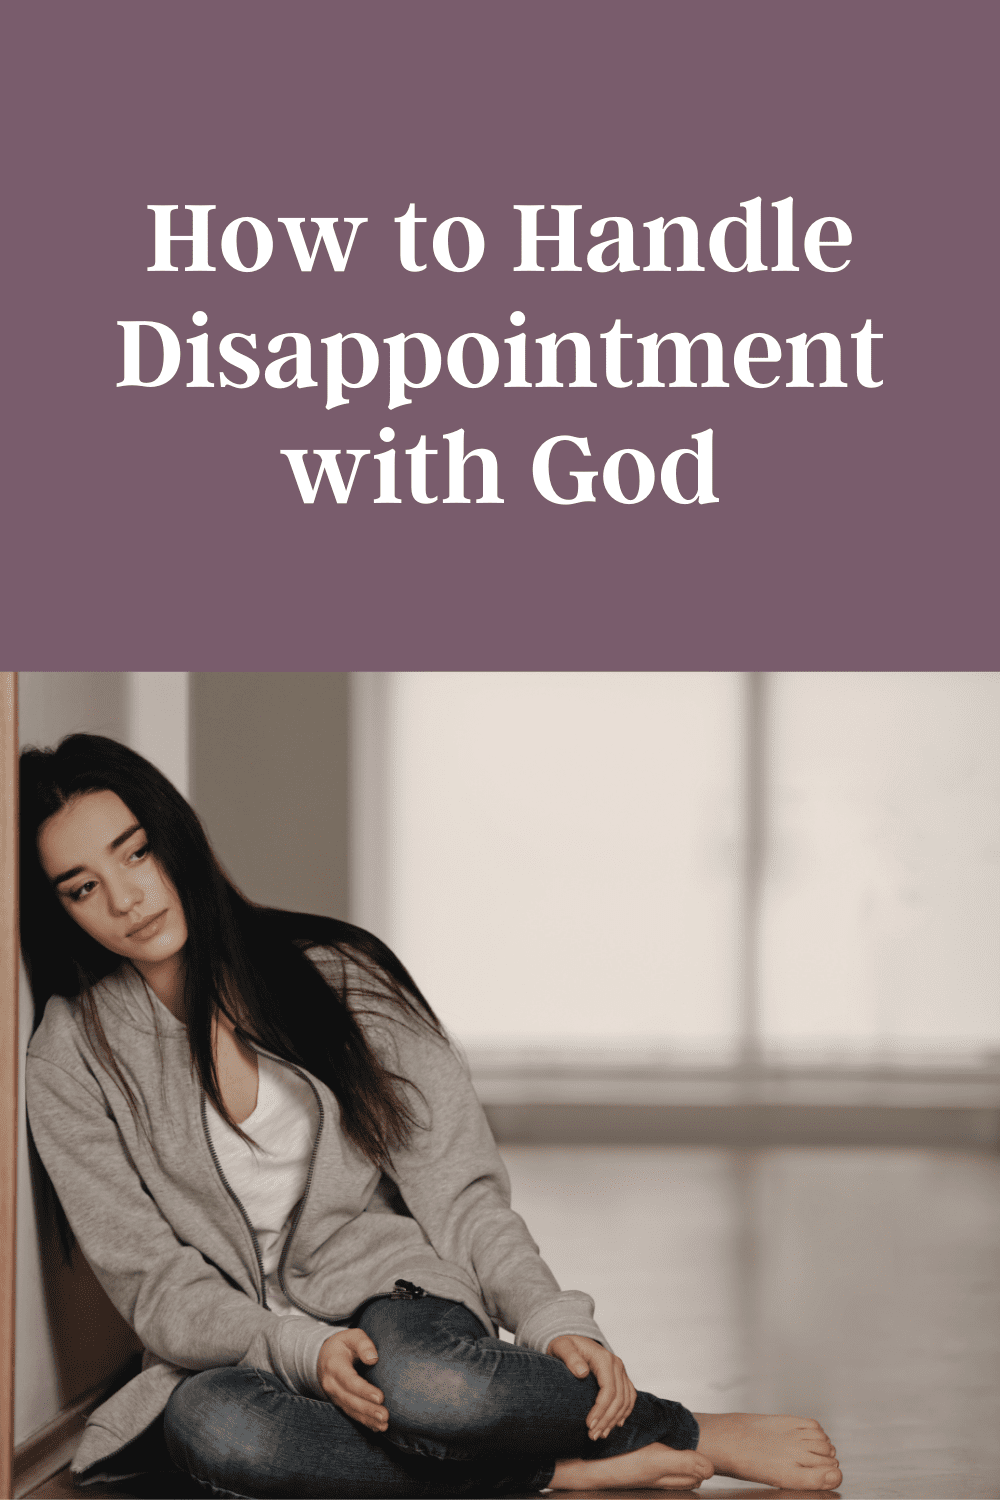 How to Be Grateful to God in Hard Times